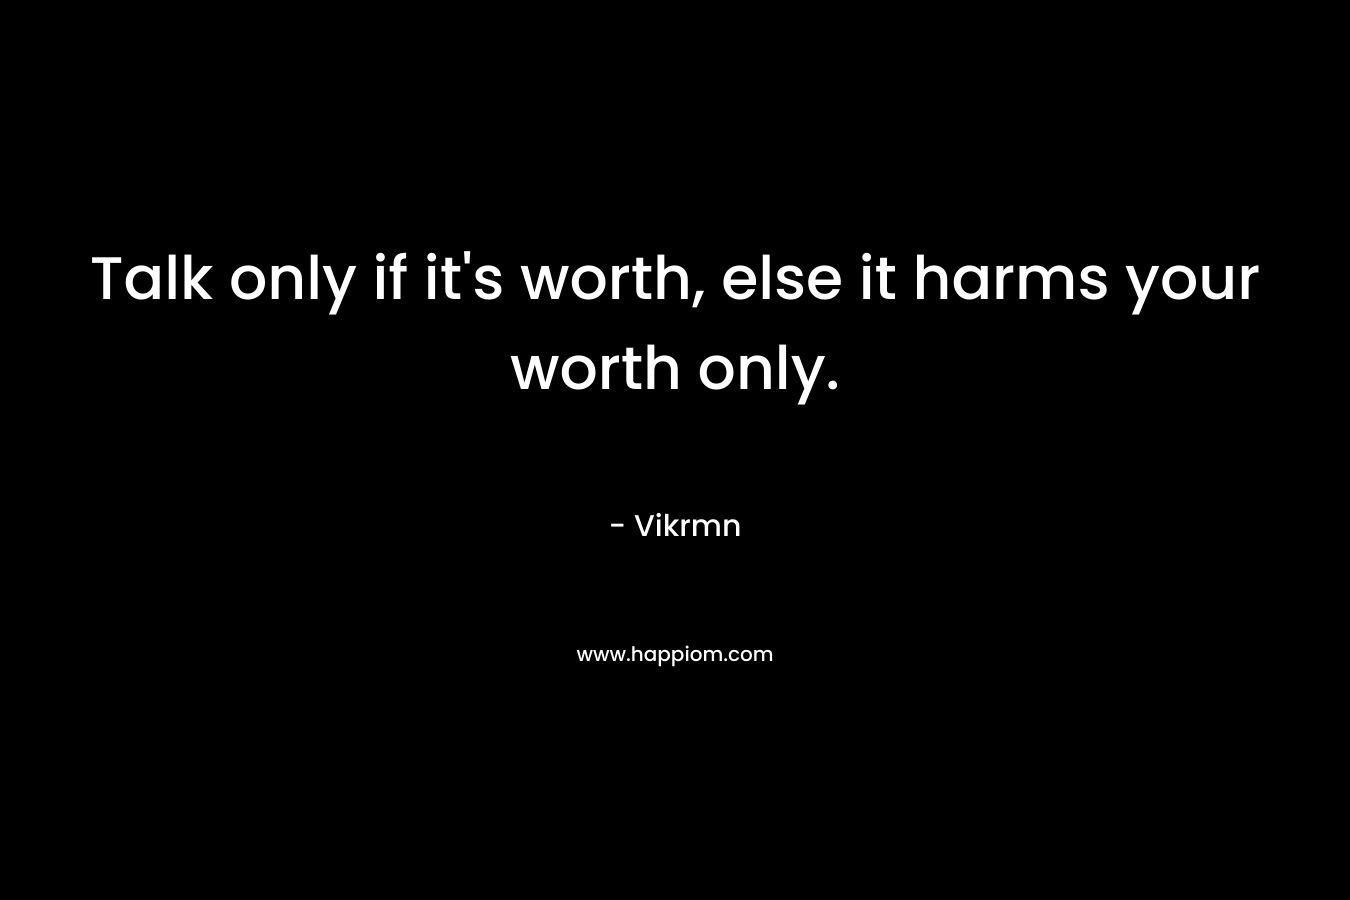 Talk only if it's worth, else it harms your worth only.